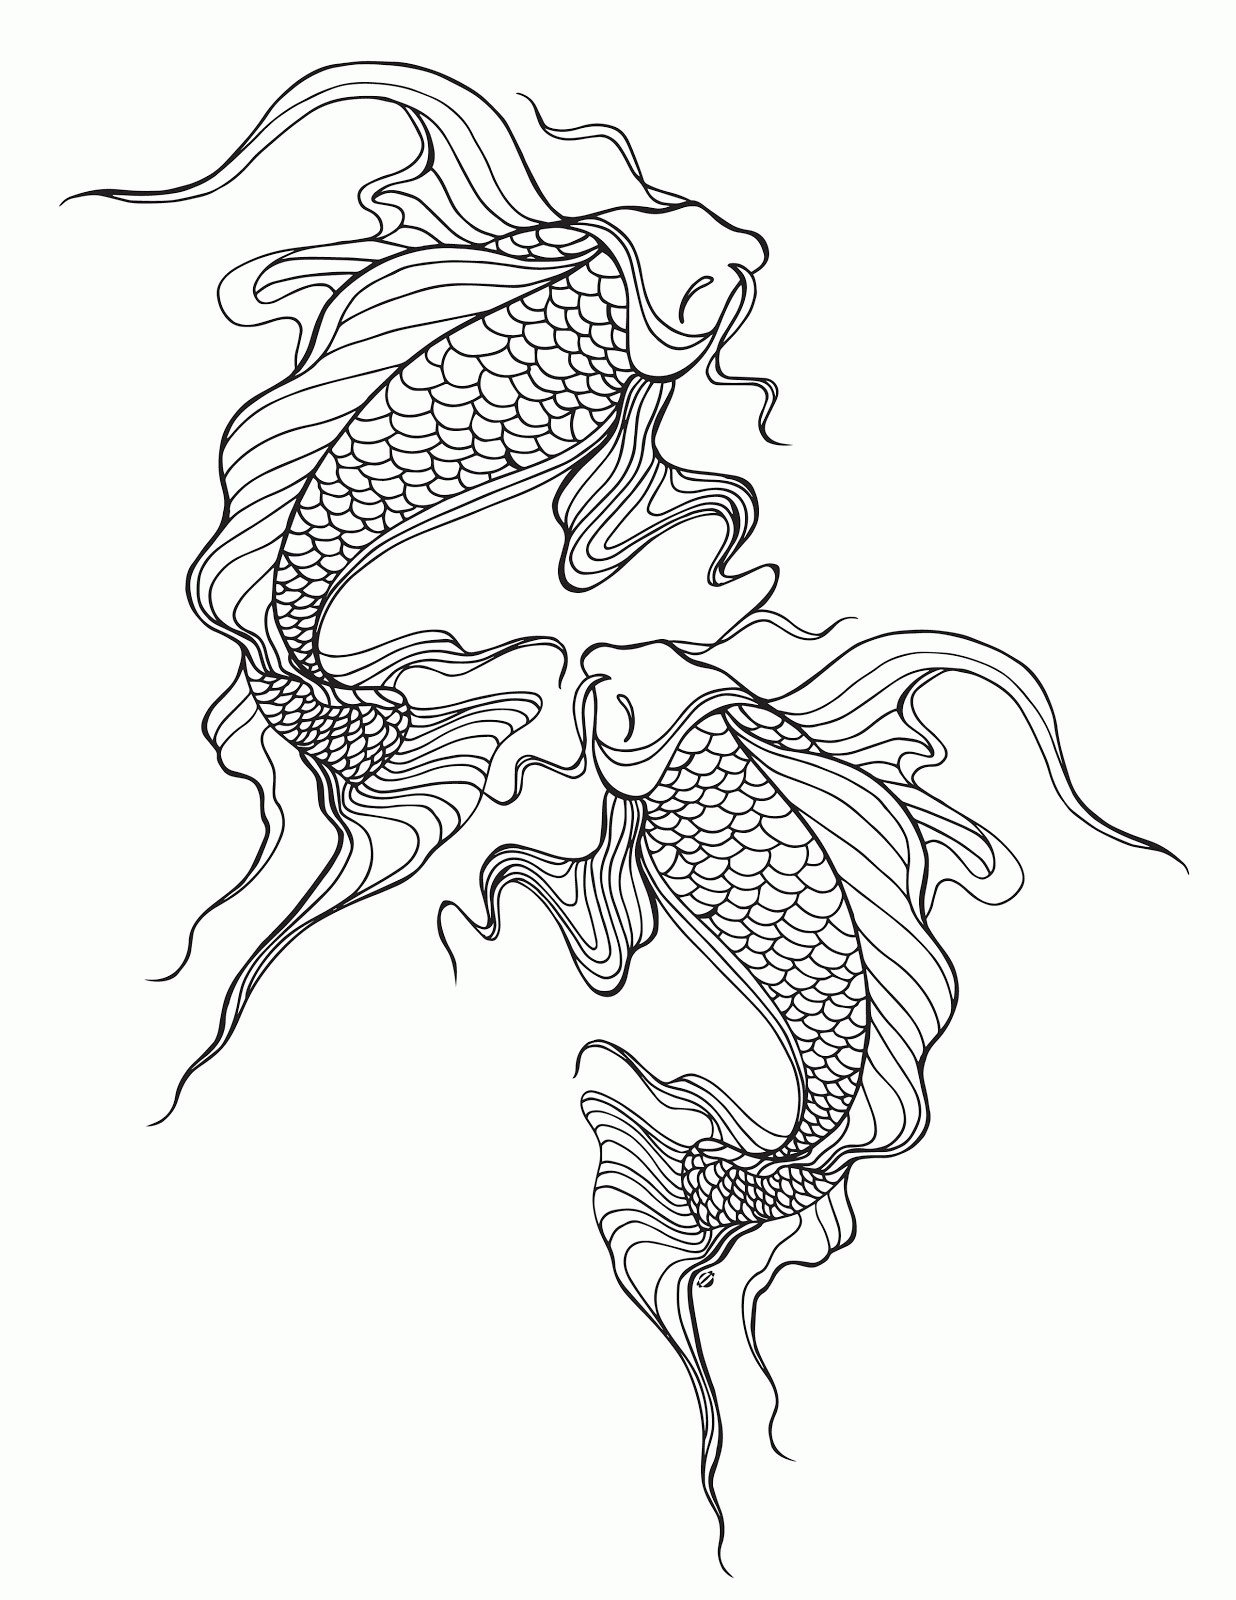 Koi Coloring Pages For Adults